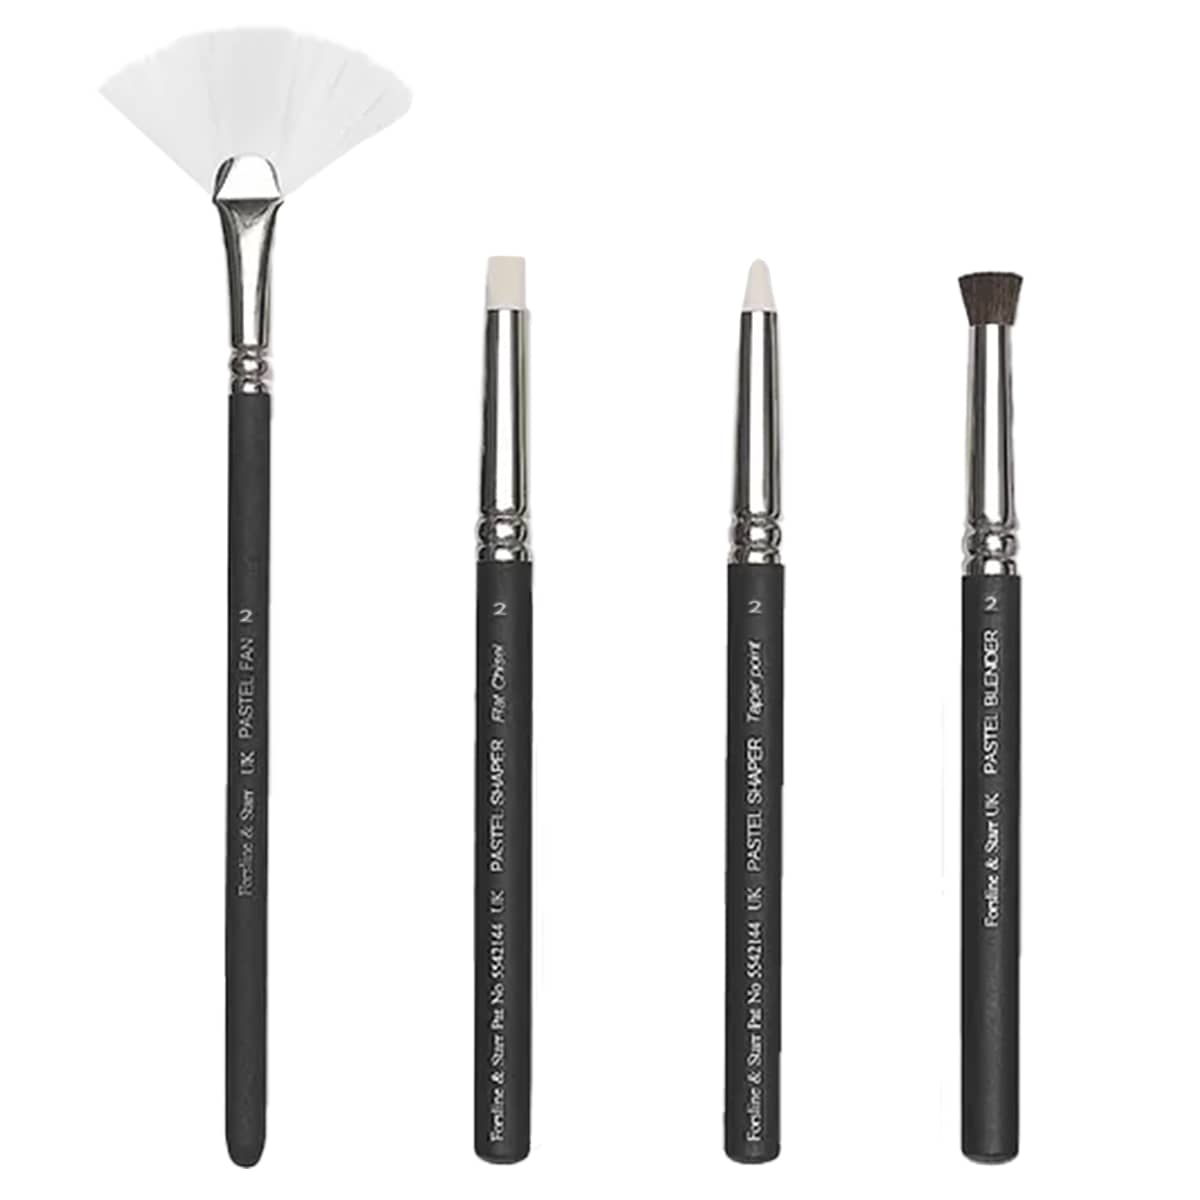 Pro Grade 1 inch Foam Sponge Wood Handle Paint Brush Set (48 Value Pack) Lightweight, Durable and used for Acrylics, Stains, Varnishes, Crafts, Art, G